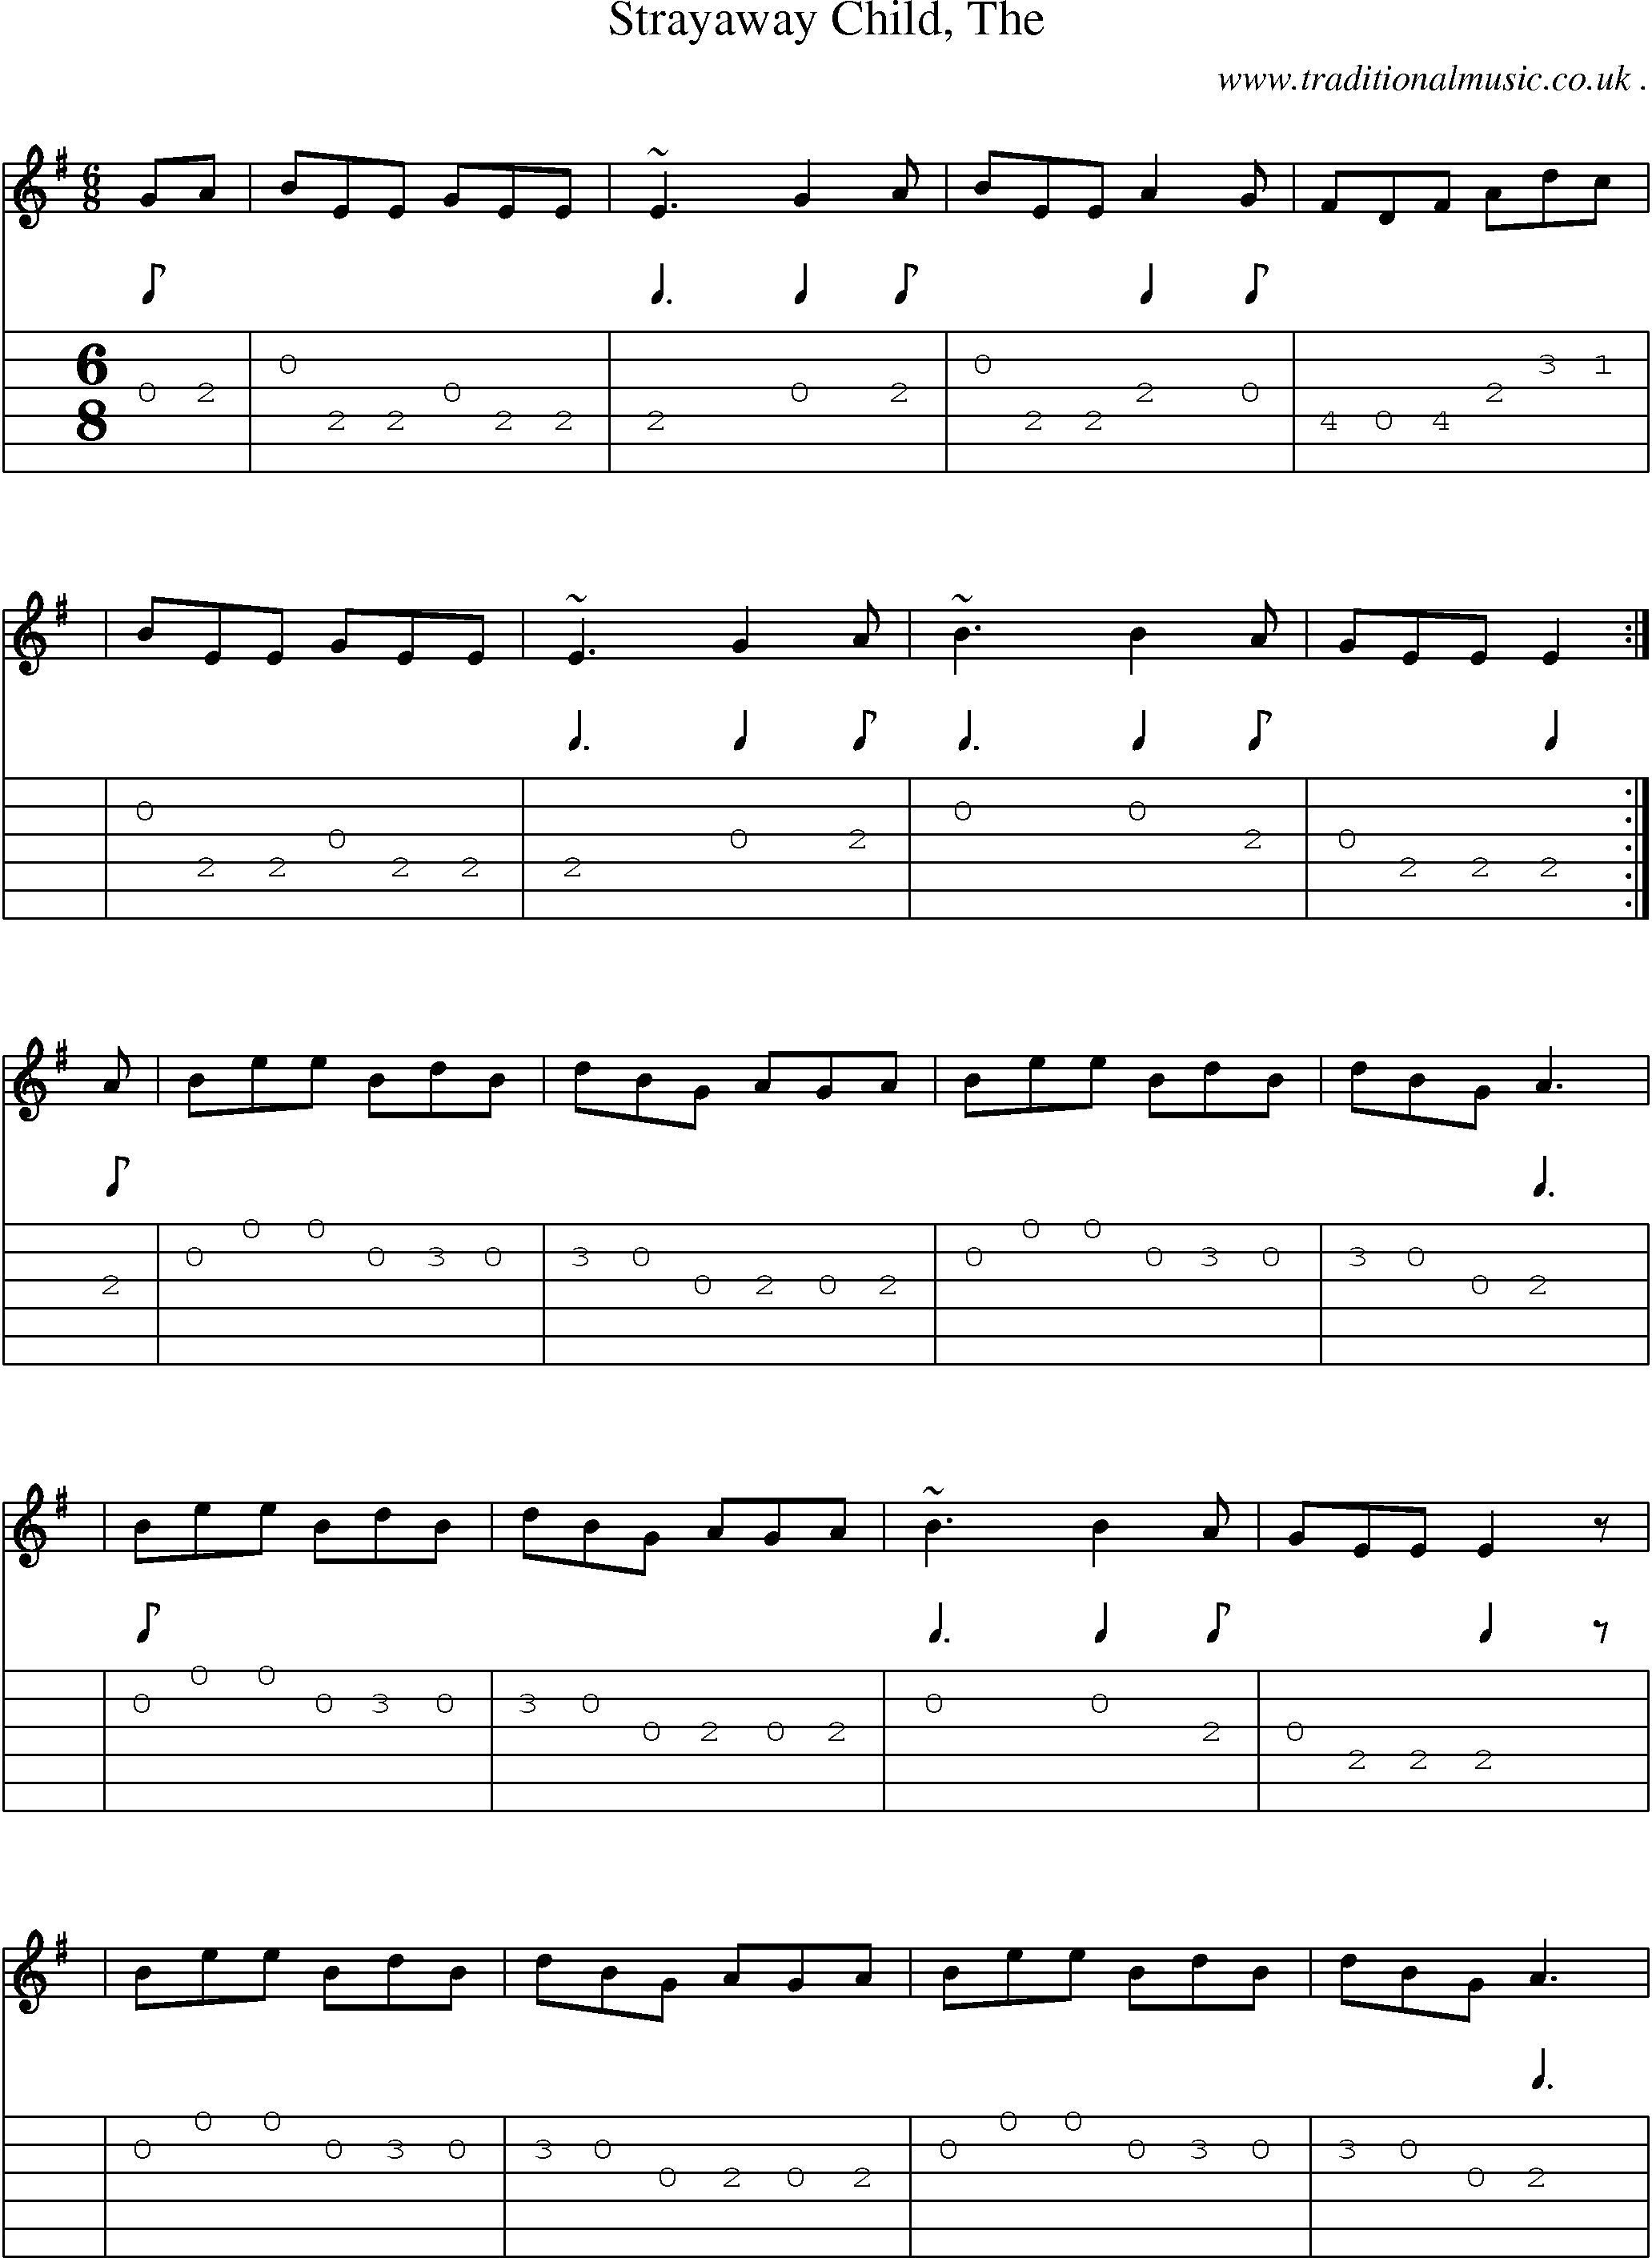 Sheet-music  score, Chords and Guitar Tabs for Strayaway Child The